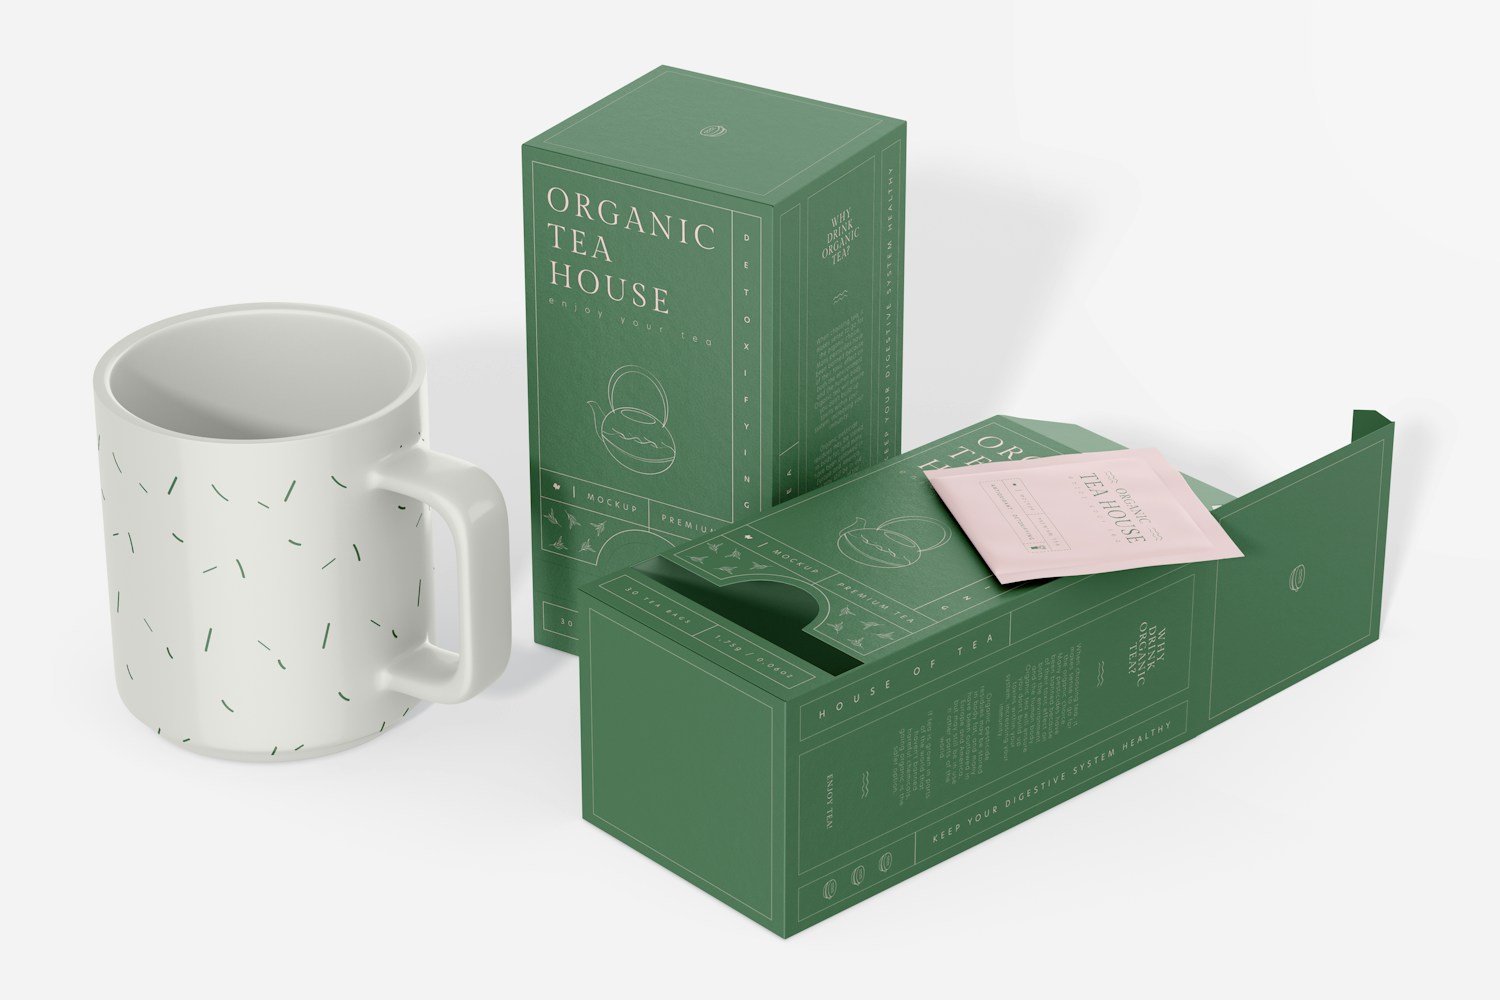 Tea Dispenser Box Mockup, Standing and Dropped